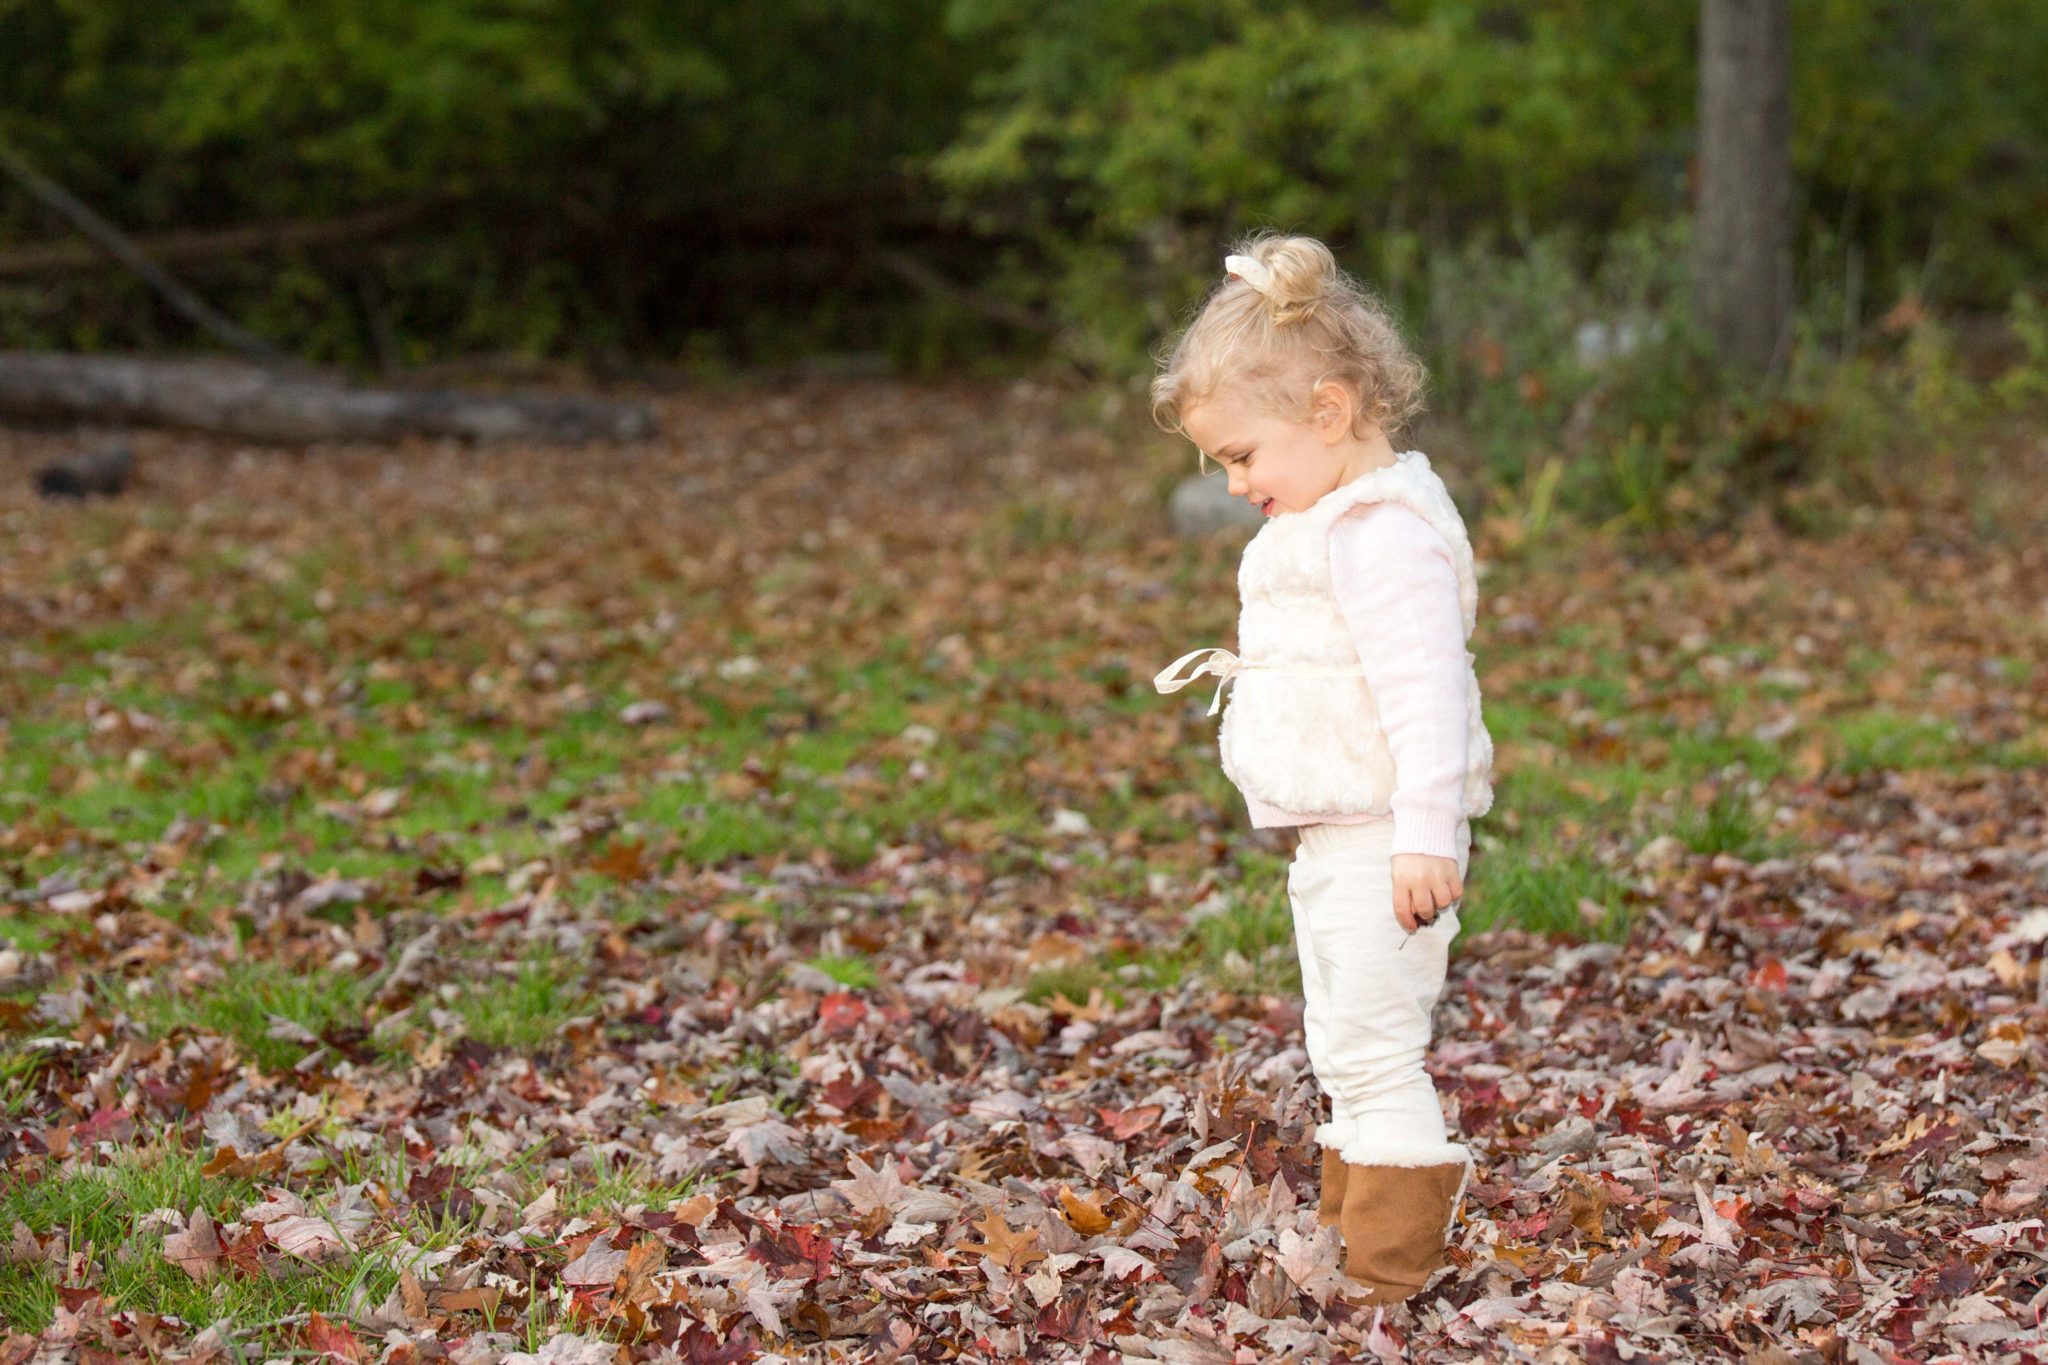 our holiday style with oshkosh b'gosh | how to dress a toddler for holiday photos on allweareblog.com